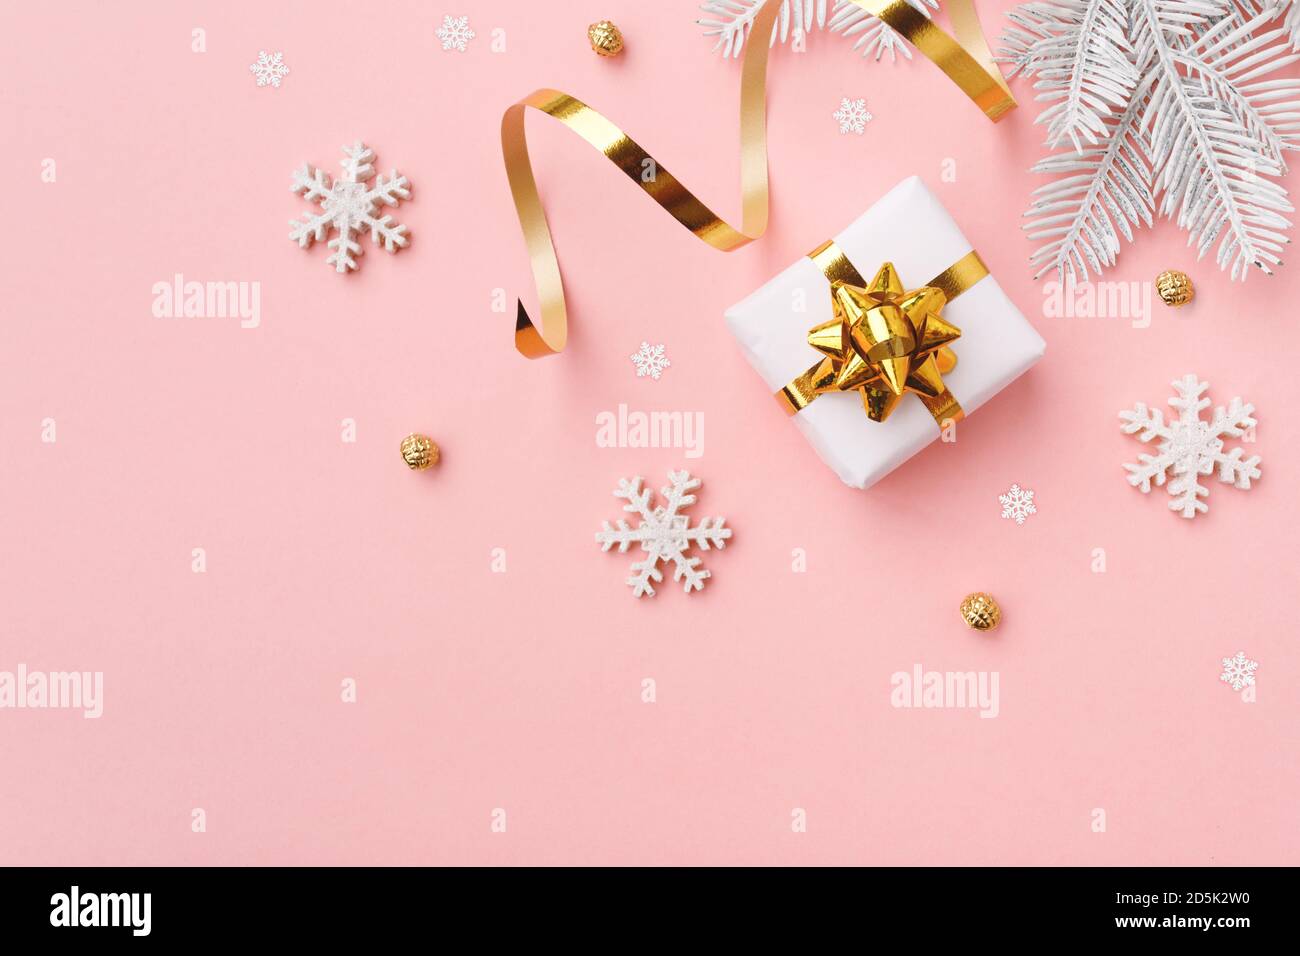 Christmas gift with snowflakes and decoration on pink pastel background Stock Photo